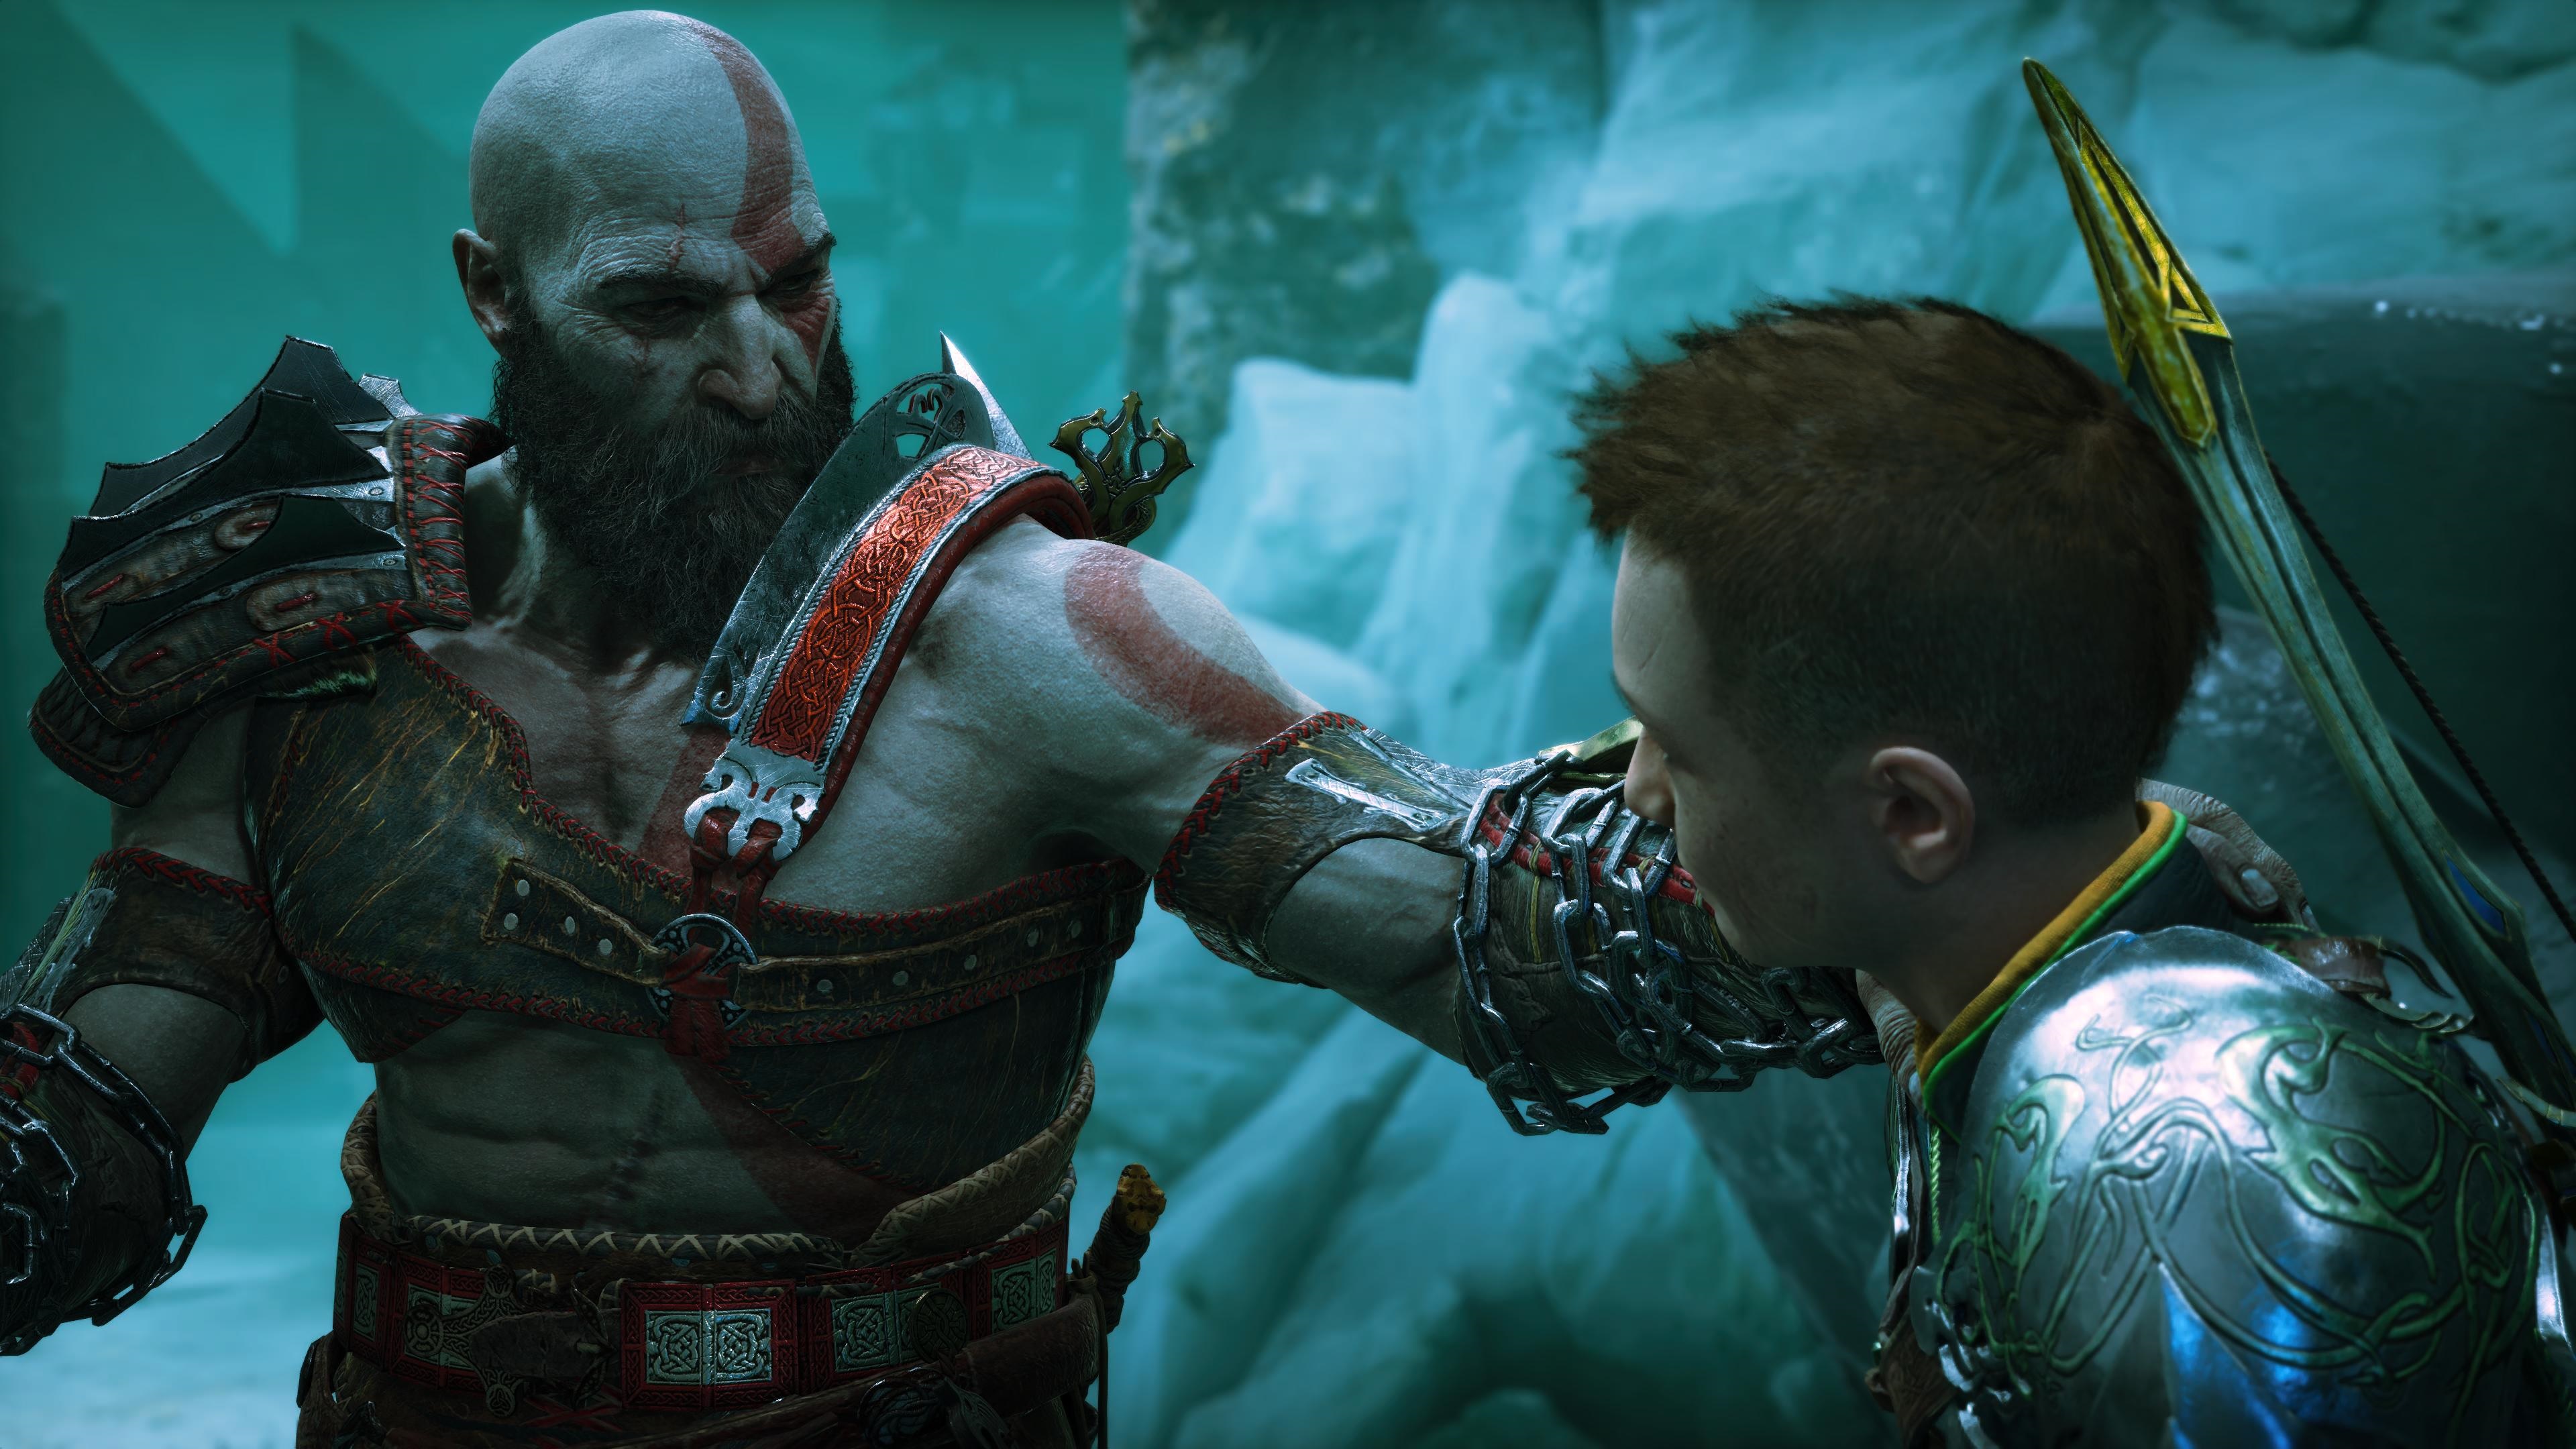 God of War's Odin Differs From Zeus in a Big Way, but the Ragnarok